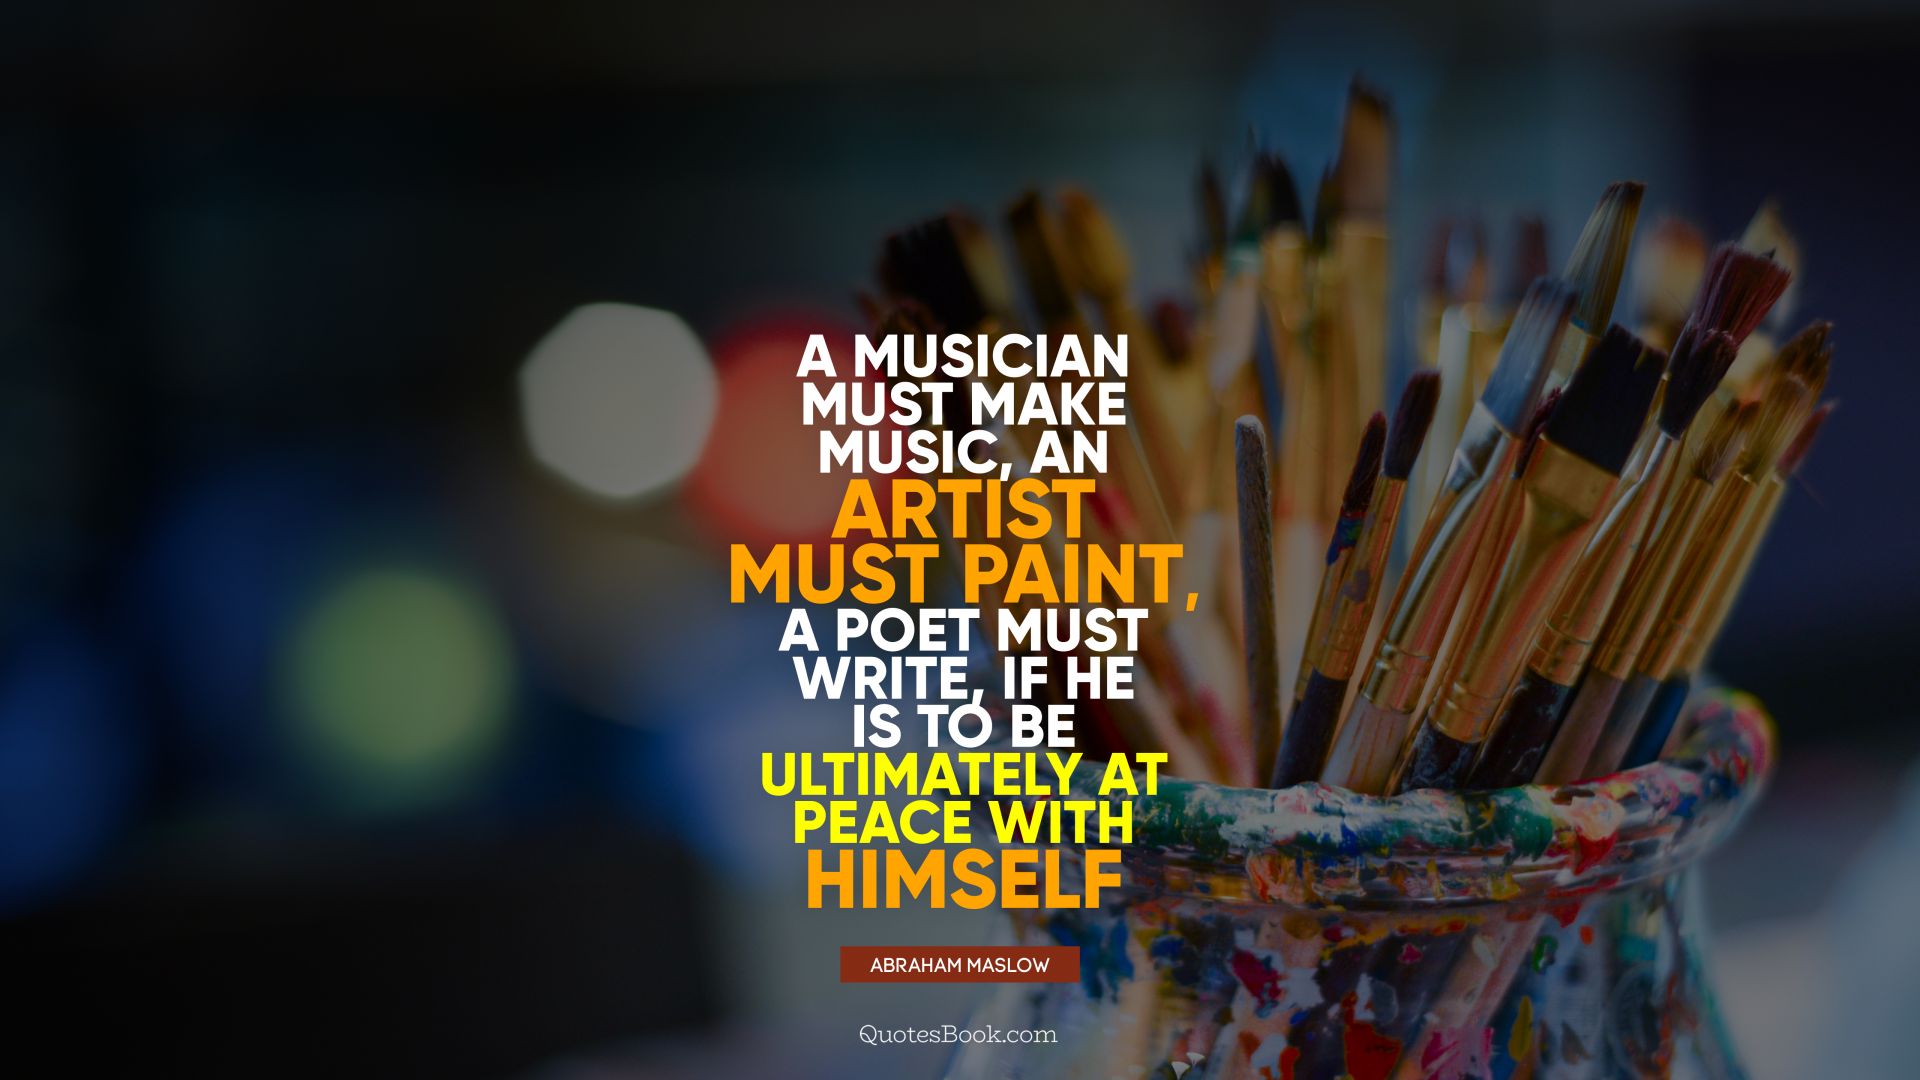 A musician must make music, an artist must paint, a poet must write, if he is to be ultimately at peace with himself. - Quote by Abraham Maslow